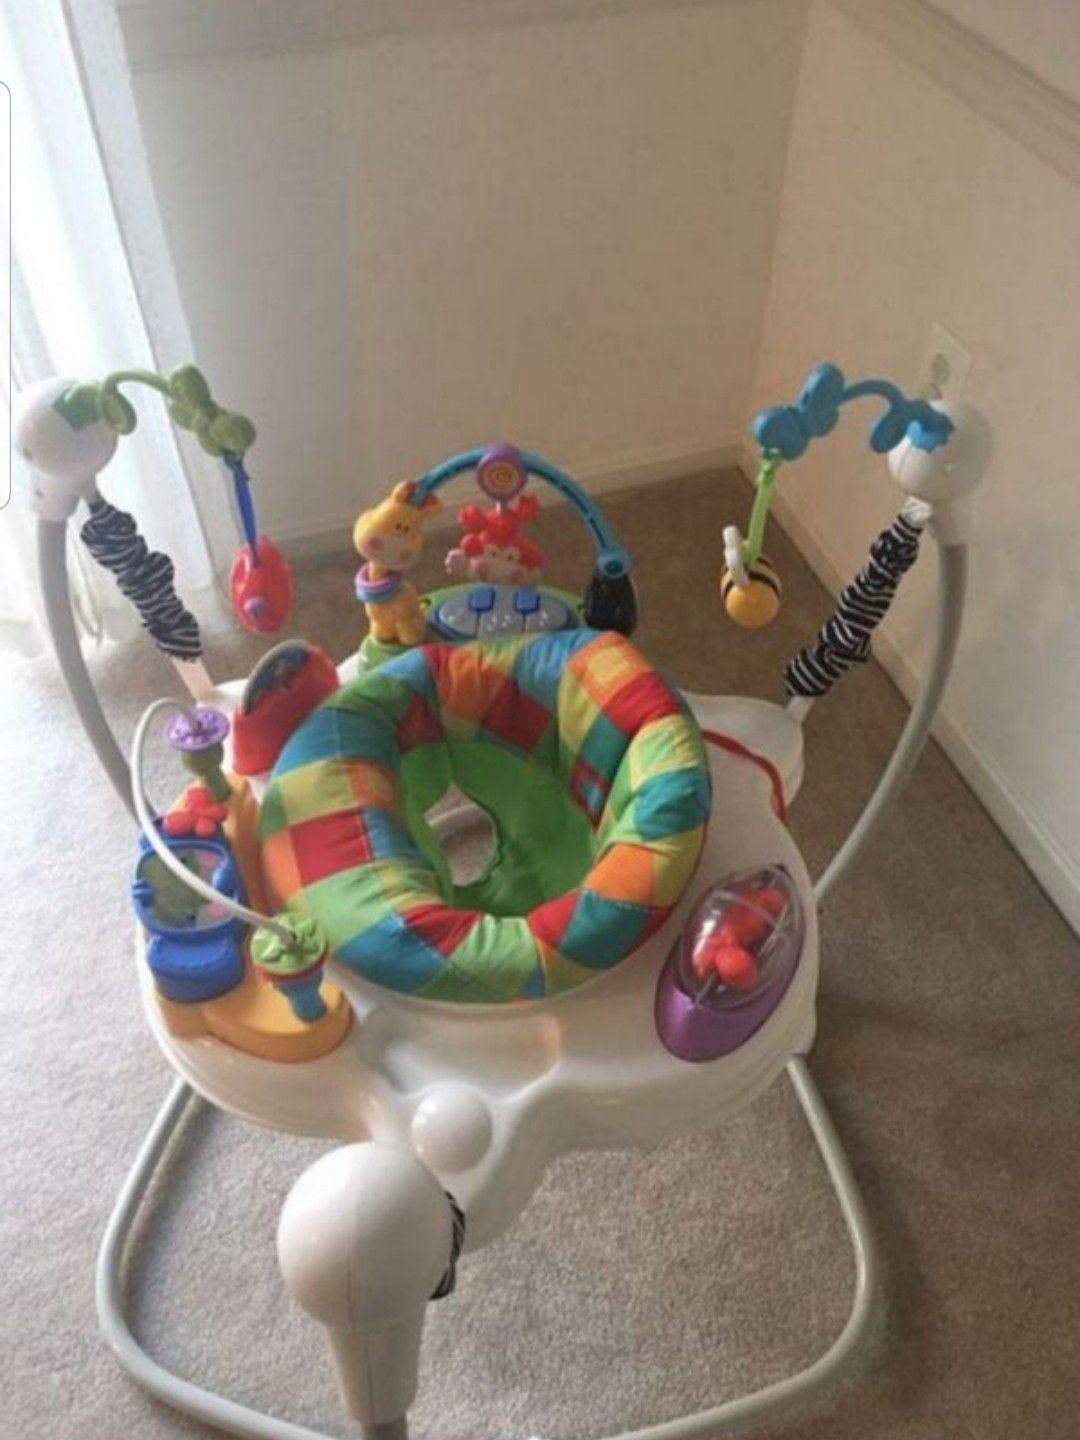 Fisher Price Discover and Grow Jumperoo